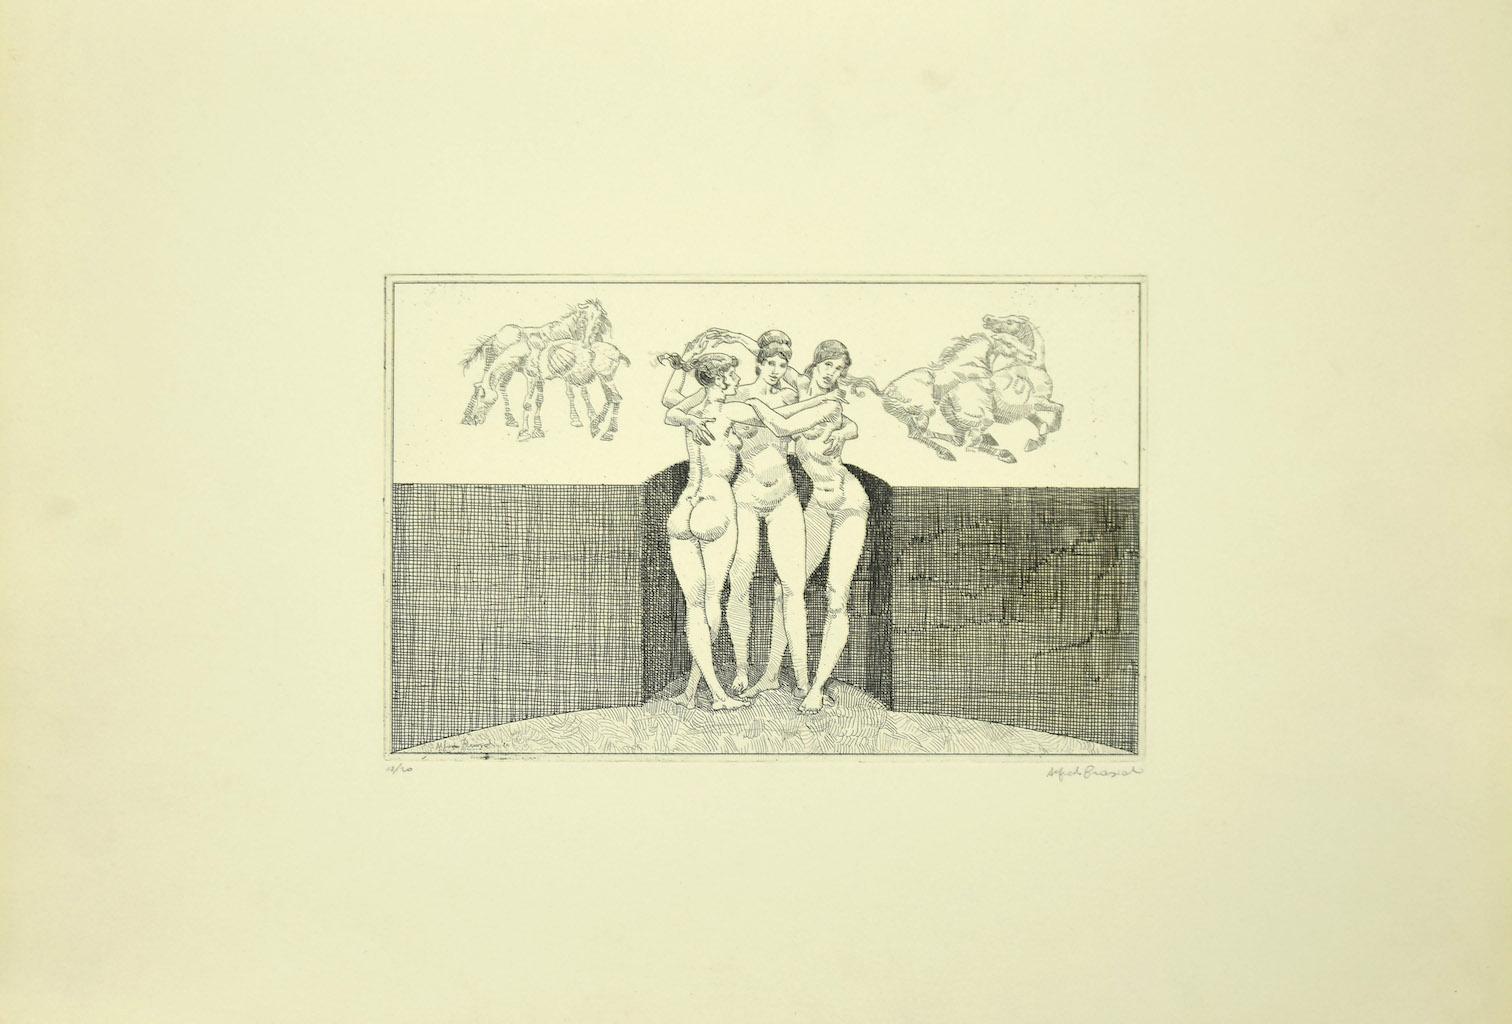 Nude Women is an original etching on paper realized by Alfredo Brasioli.

Hand-signed on the lower right. Image Dimensions: 15.5 x 25 cm

Numbered on the lower left in pencil, copy 18 from an edition of 20 prints.

Good condition.

The artwork